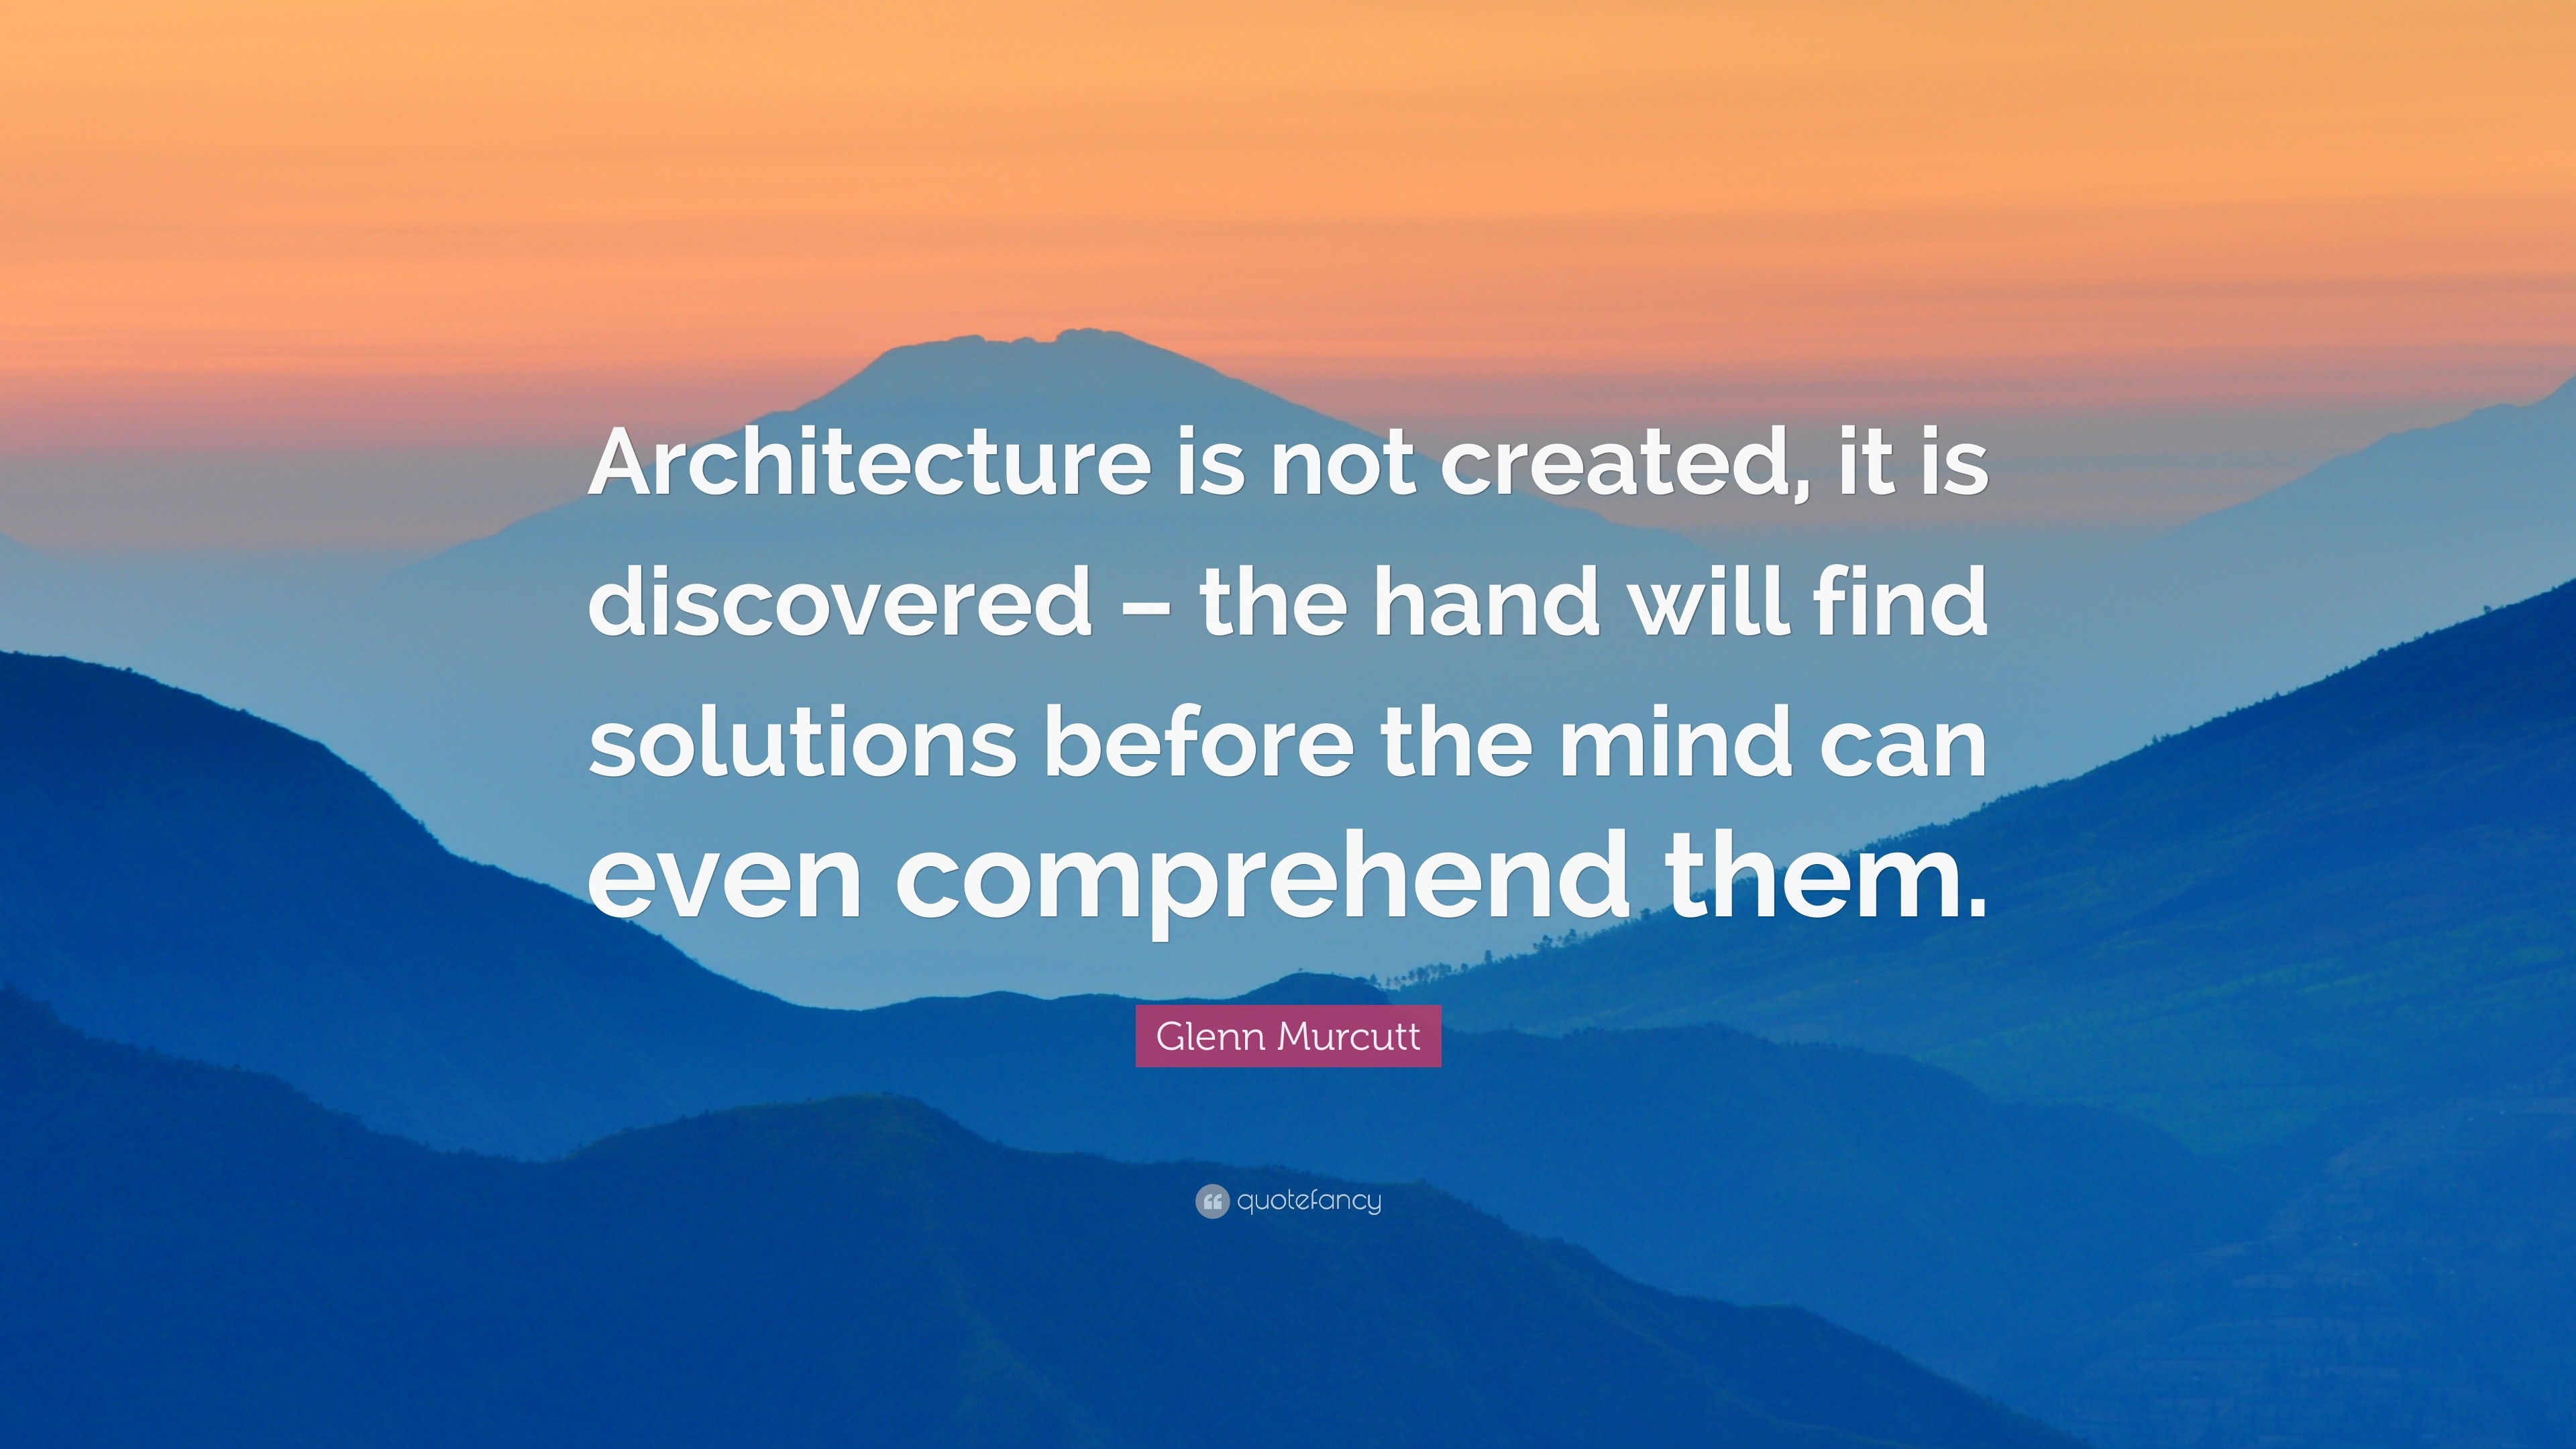 Glenn Murcutt Quote: “Architecture is not created, it is discovered ...